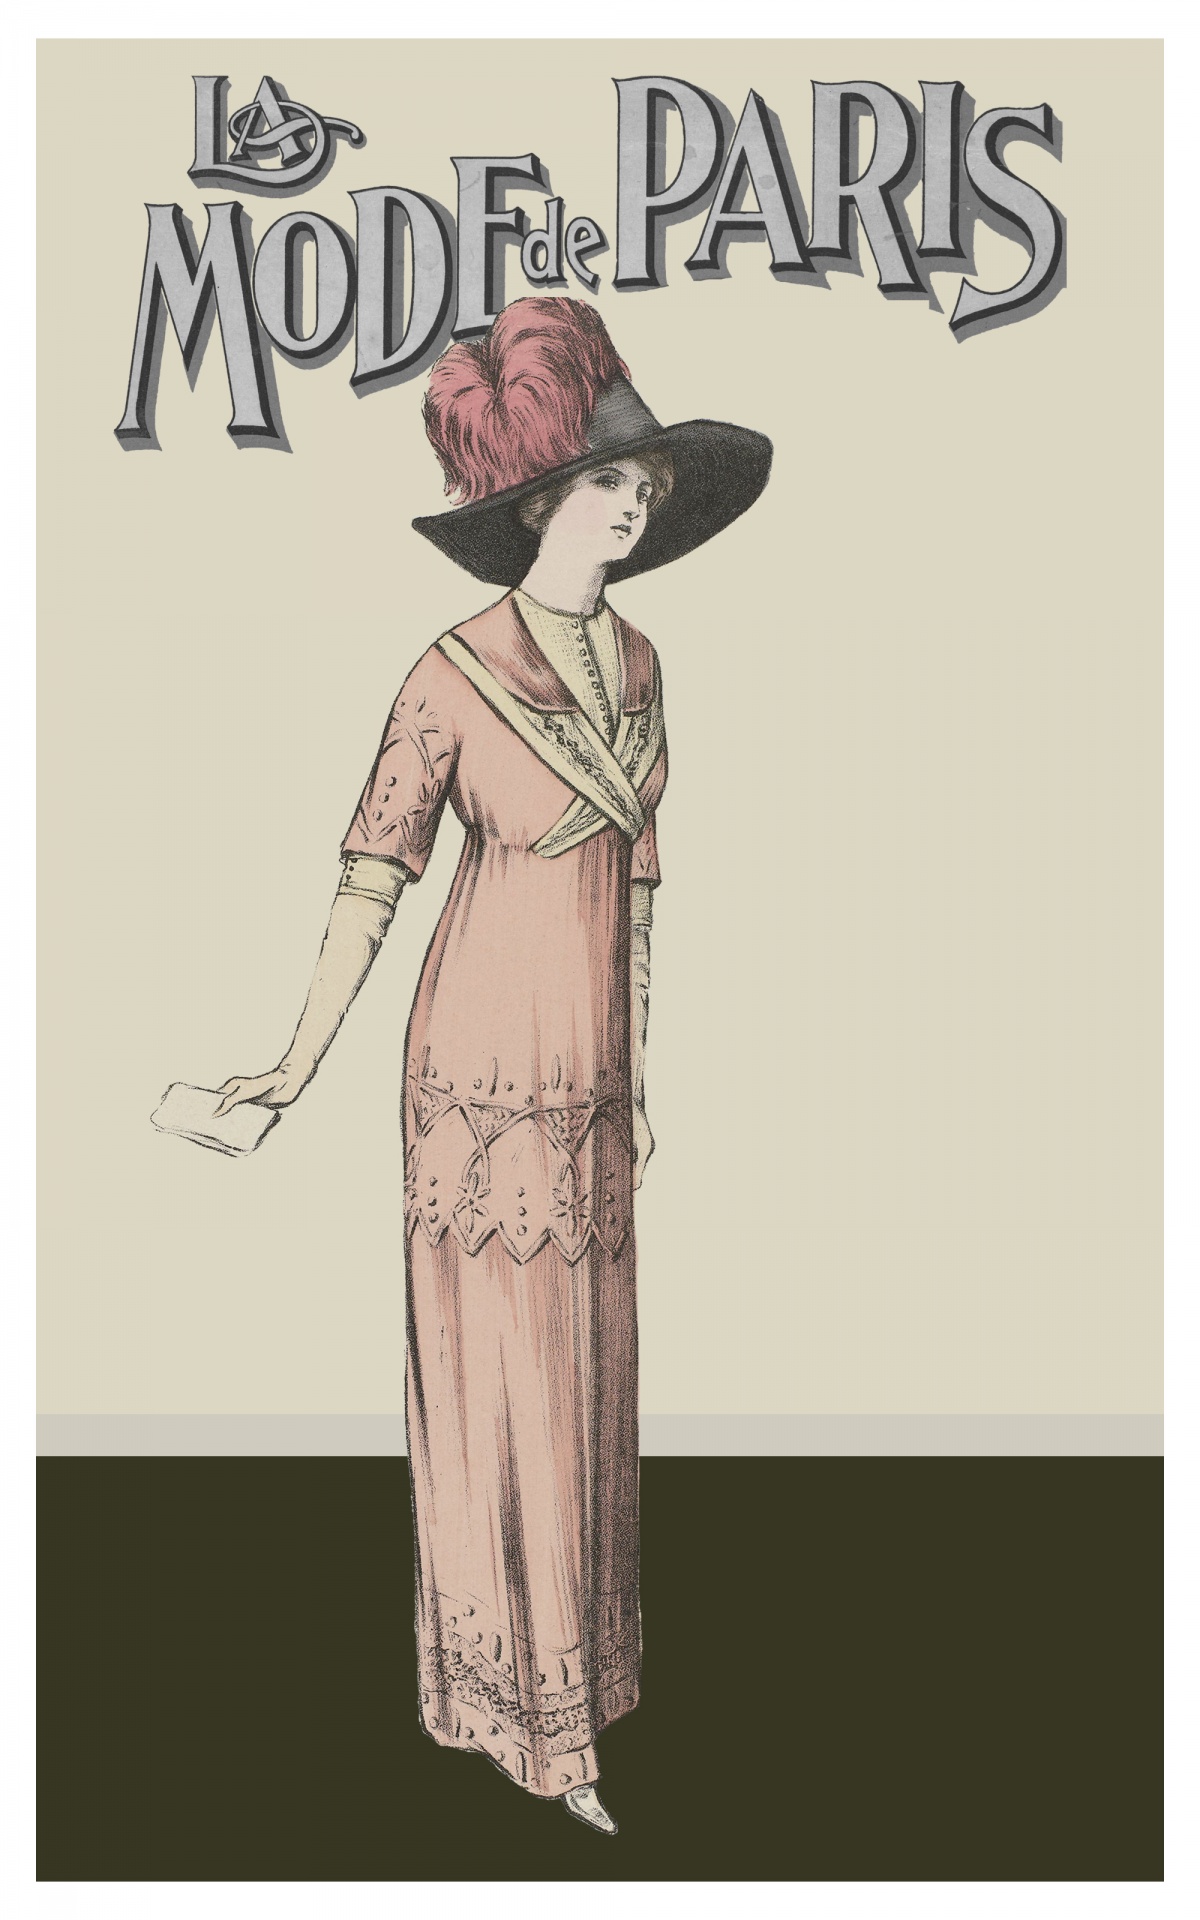 Vintage victorian fashion woman in paris couture on La Mode de Paris, French magazine front page ideal as a poster, print or for scrapbooking etc